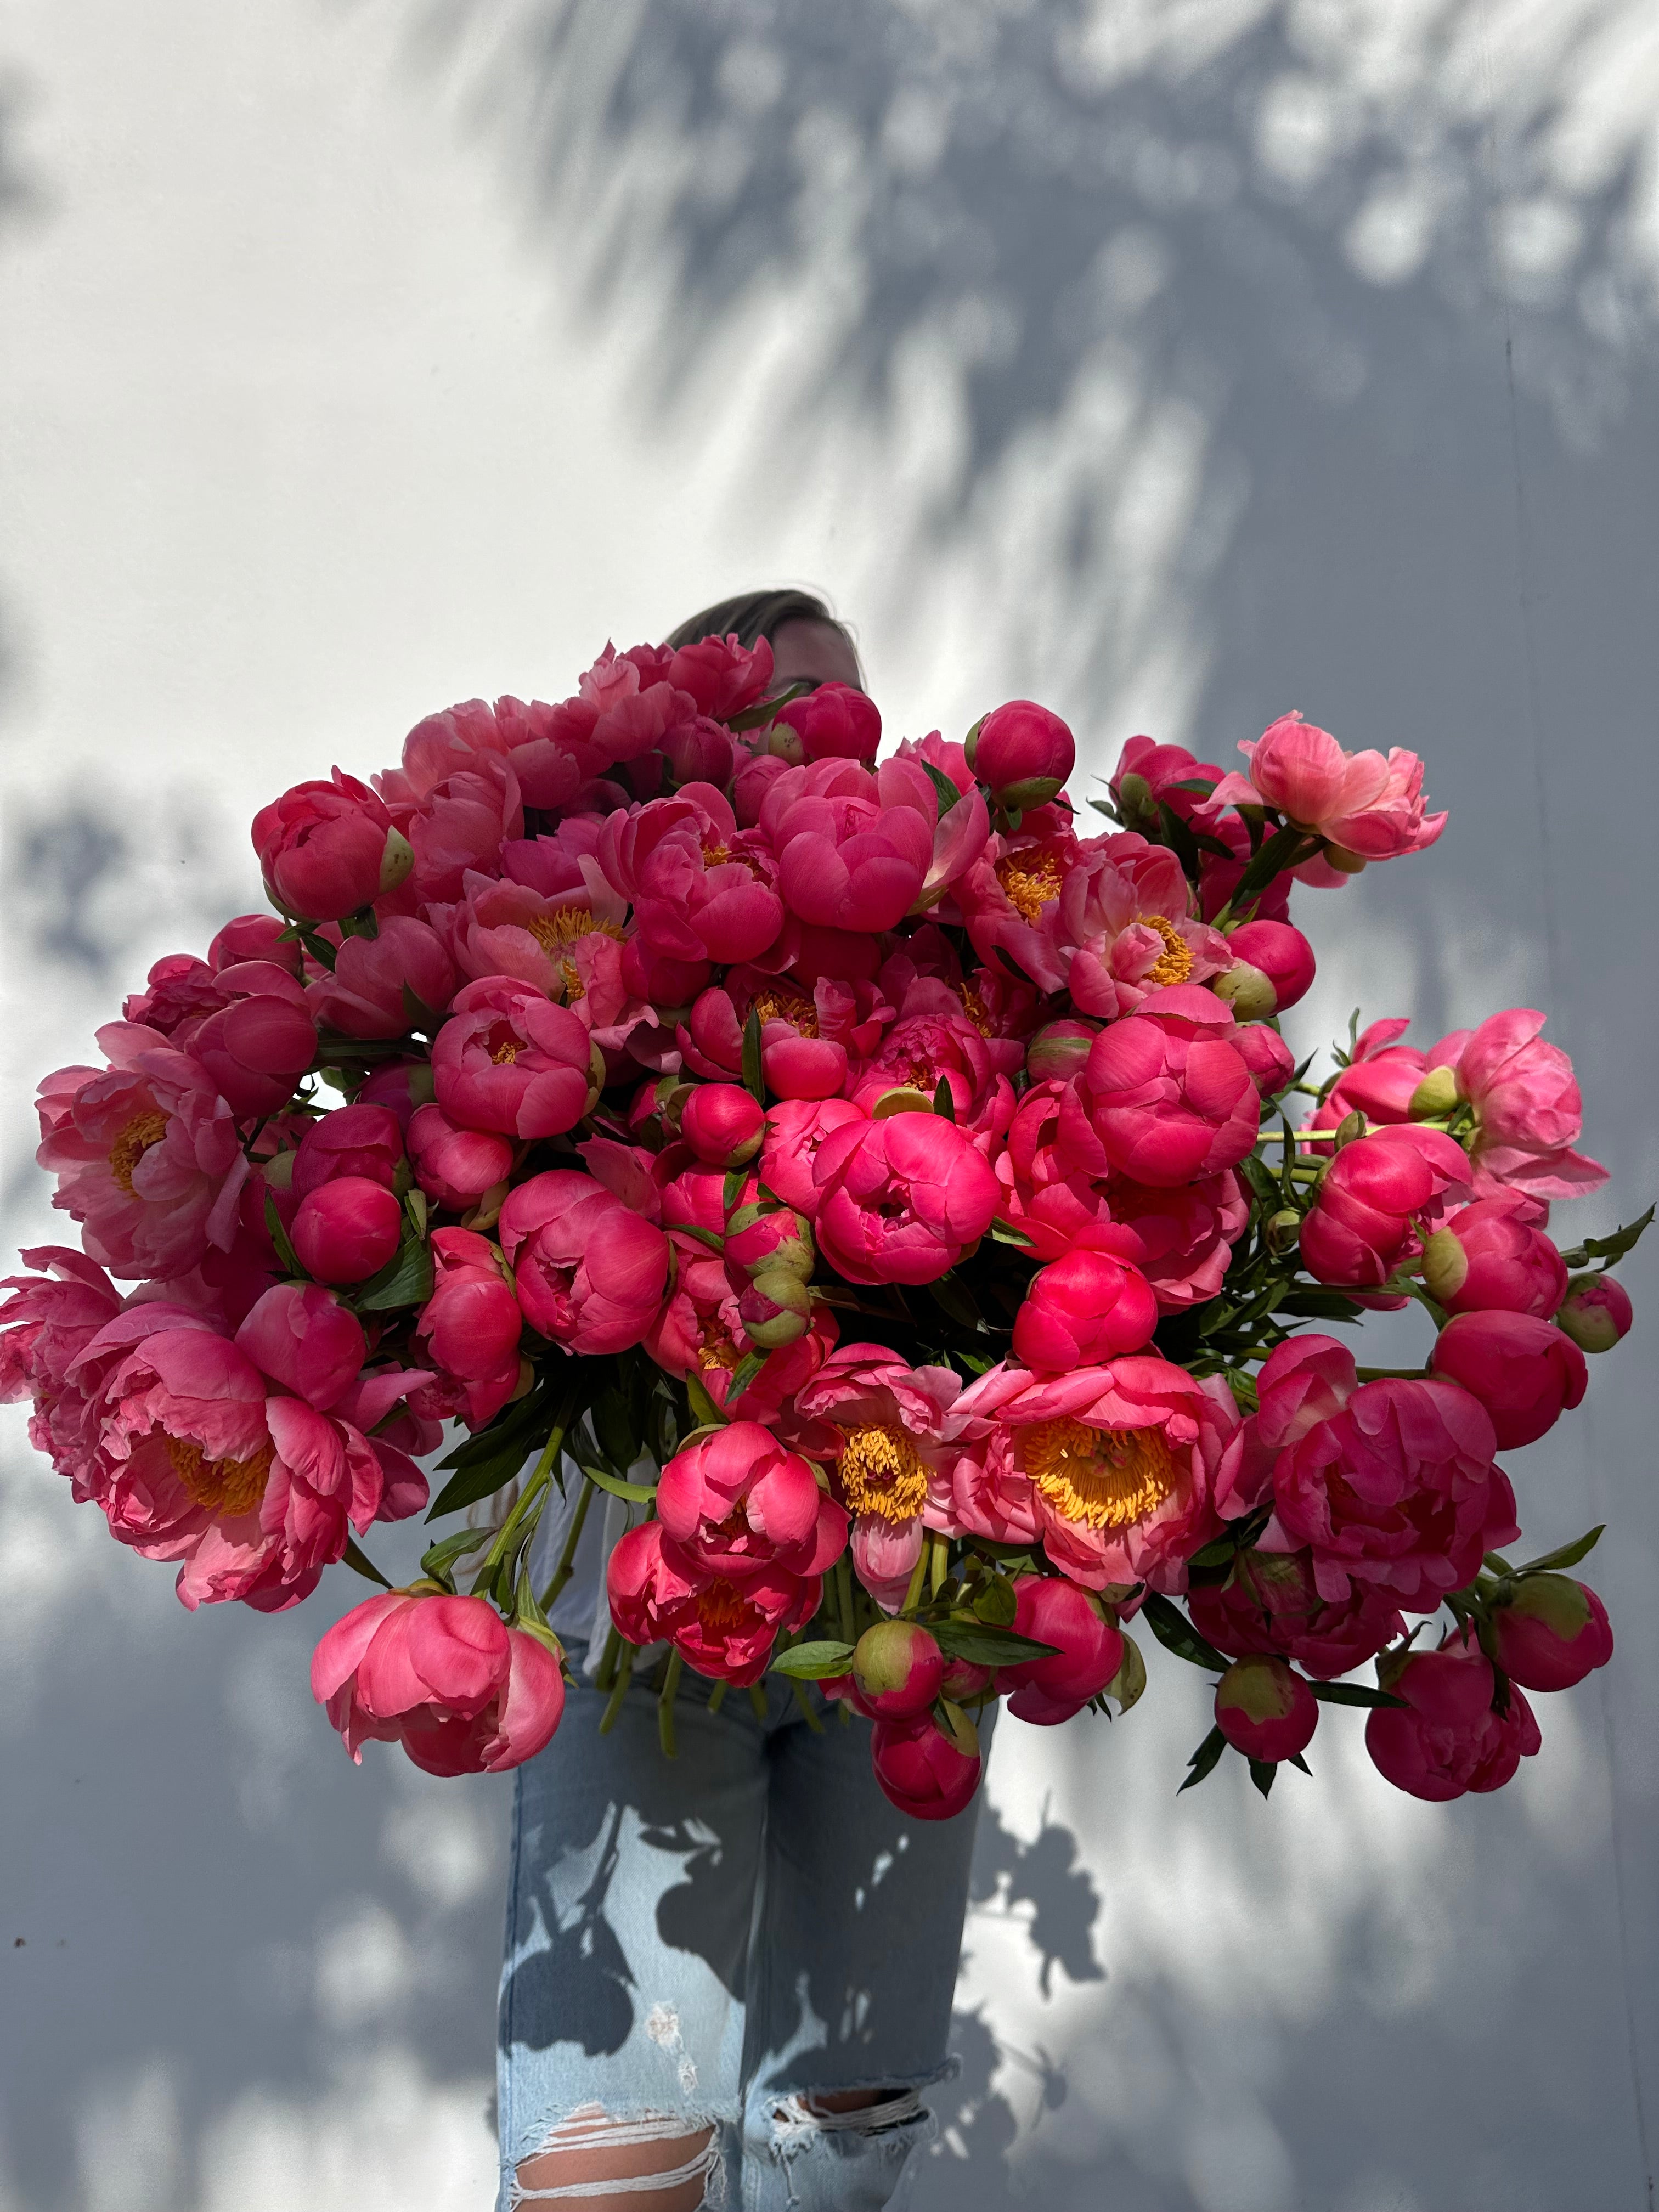 Coral is the new pink - 120 coral peonies